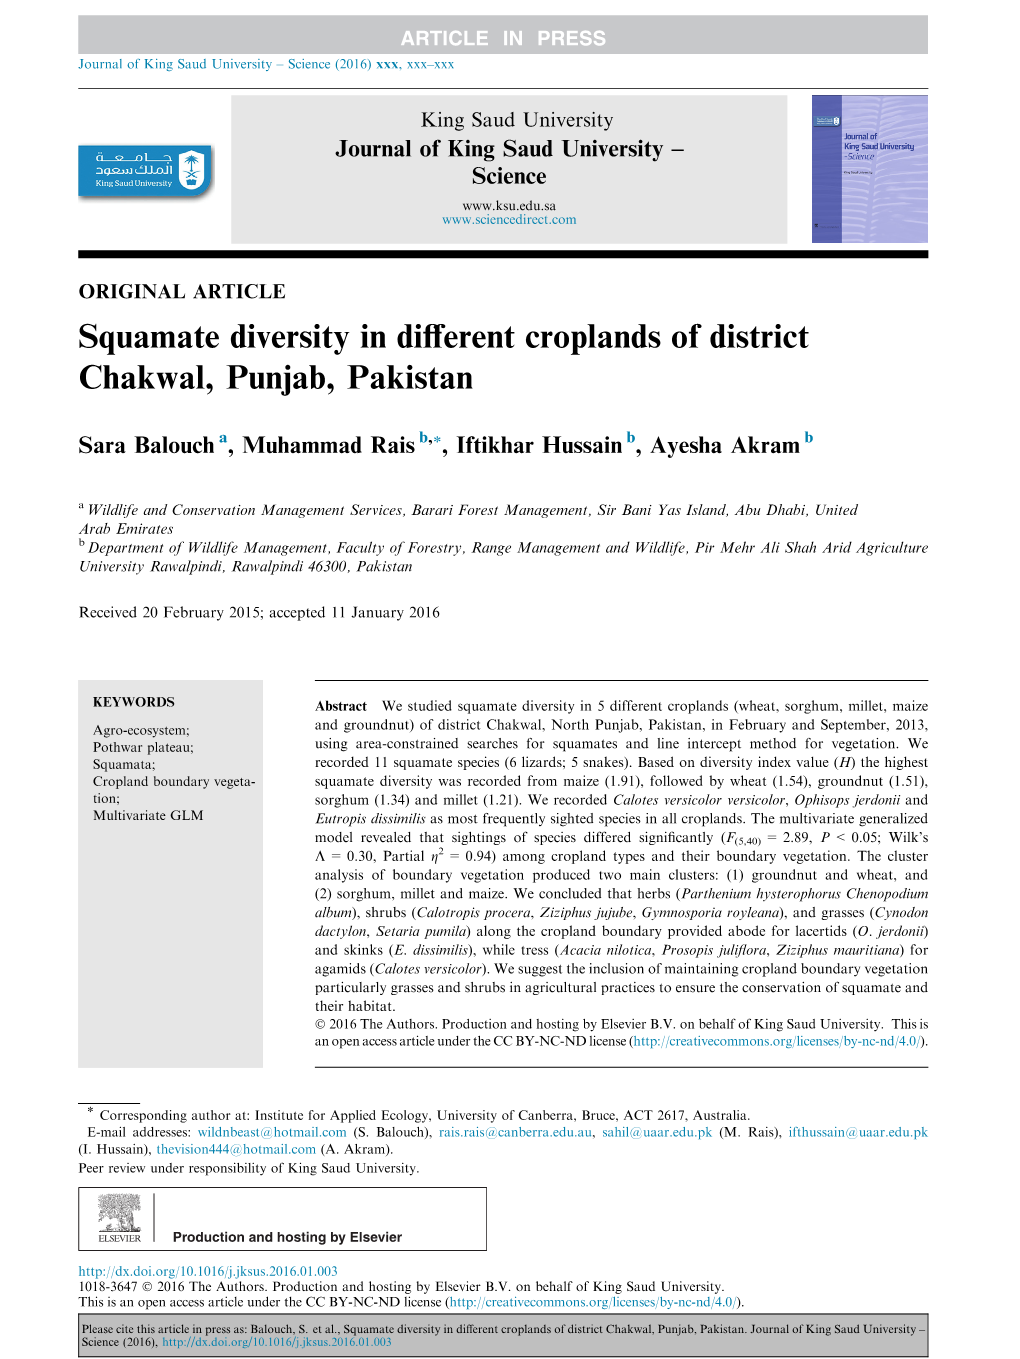 Squamate Diversity in Different Croplands of District Chakwal, Punjab, Pakistan